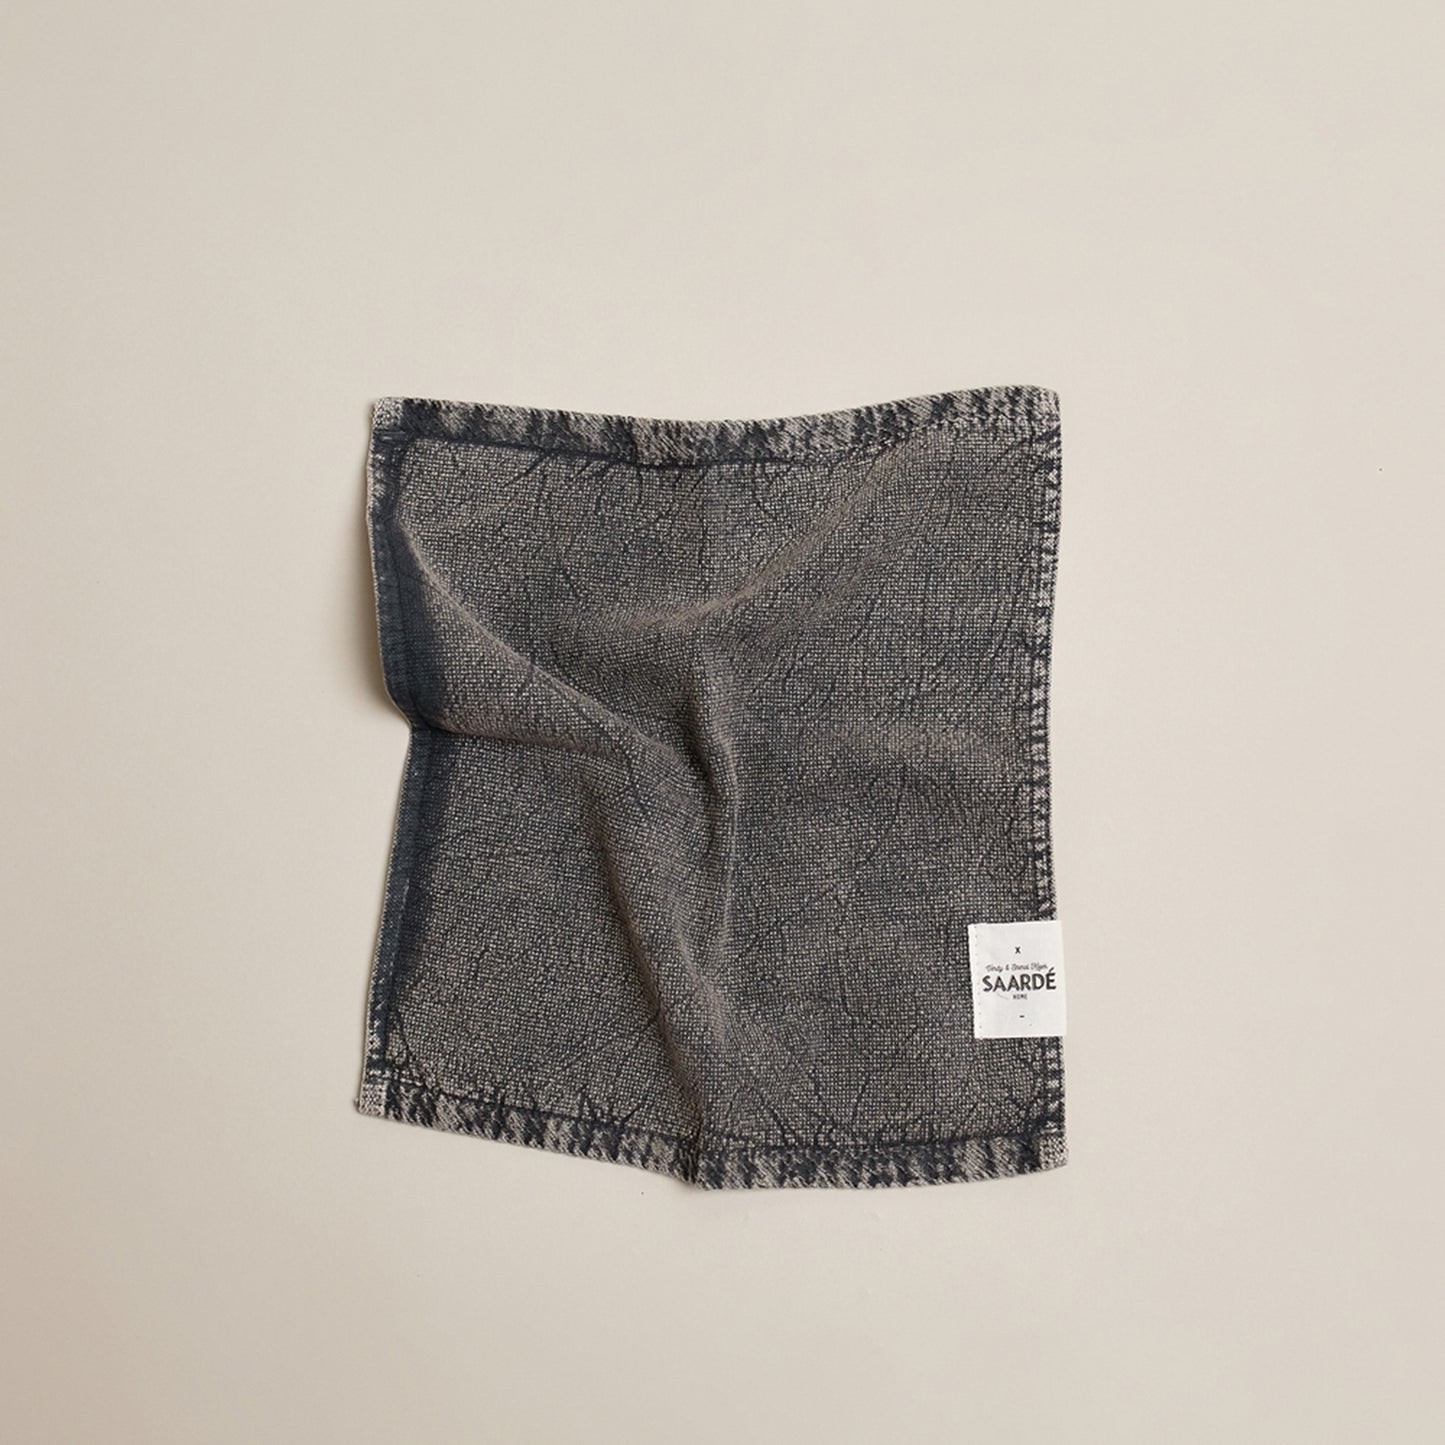 Vintage Wash Towel Collection - Charcoal